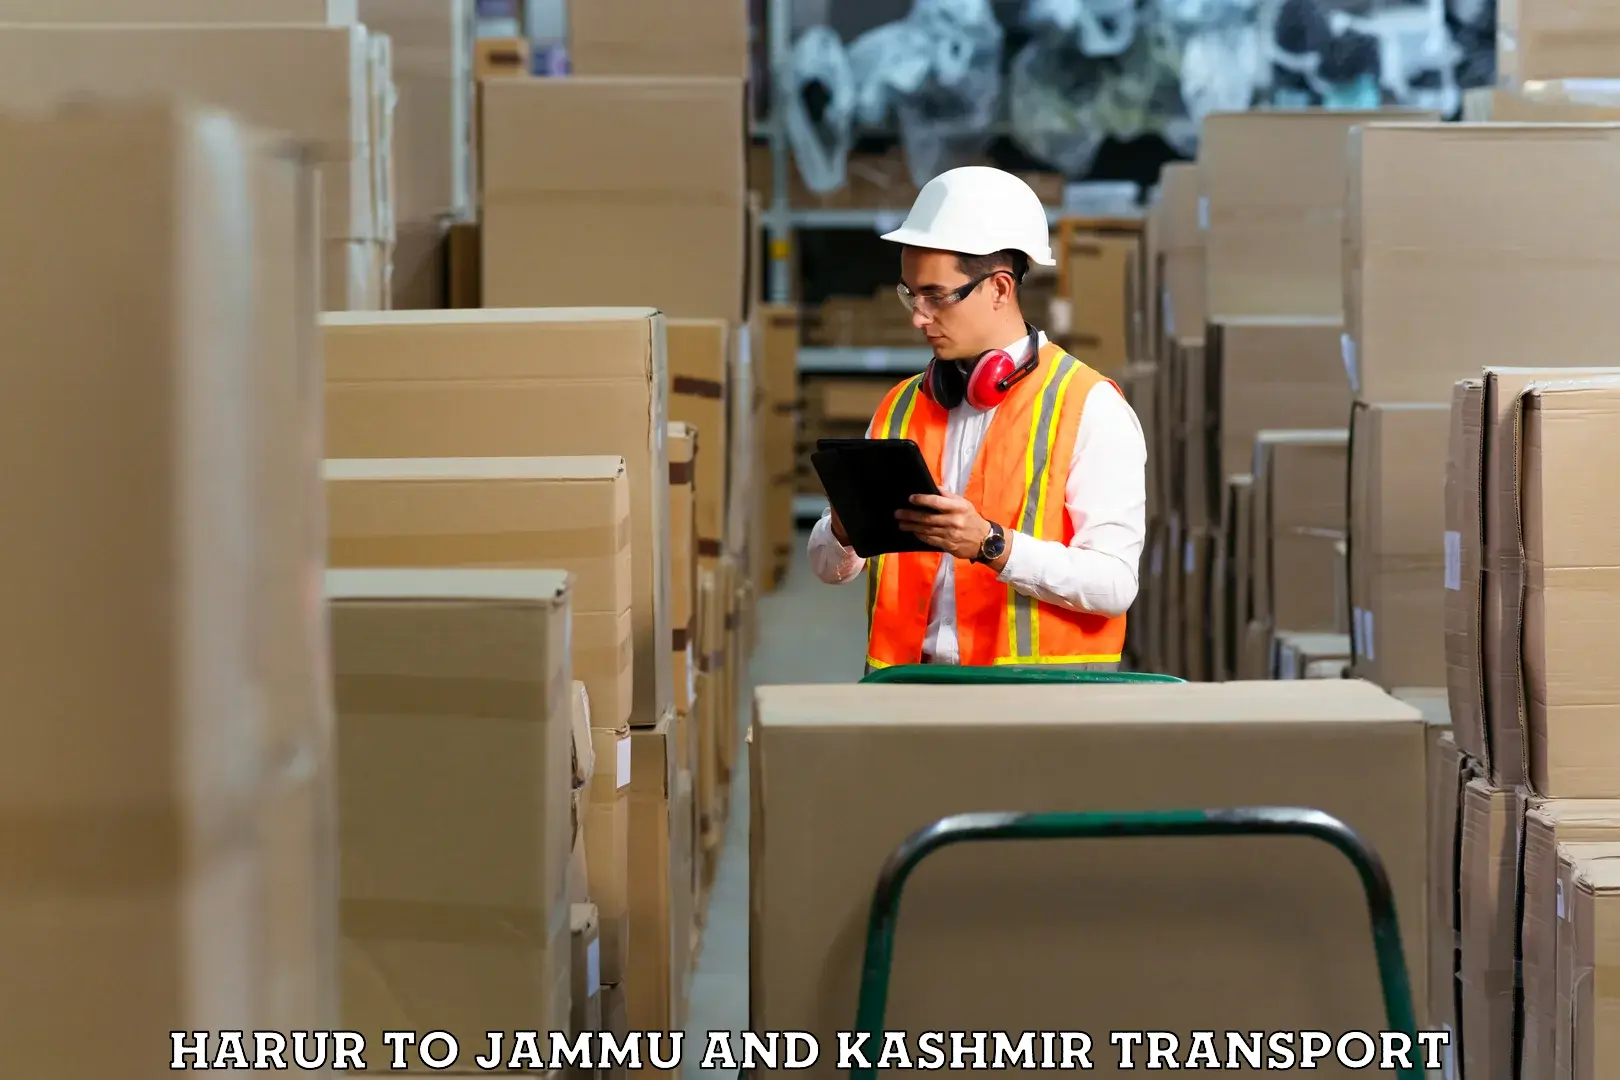 Nationwide transport services Harur to Jammu and Kashmir